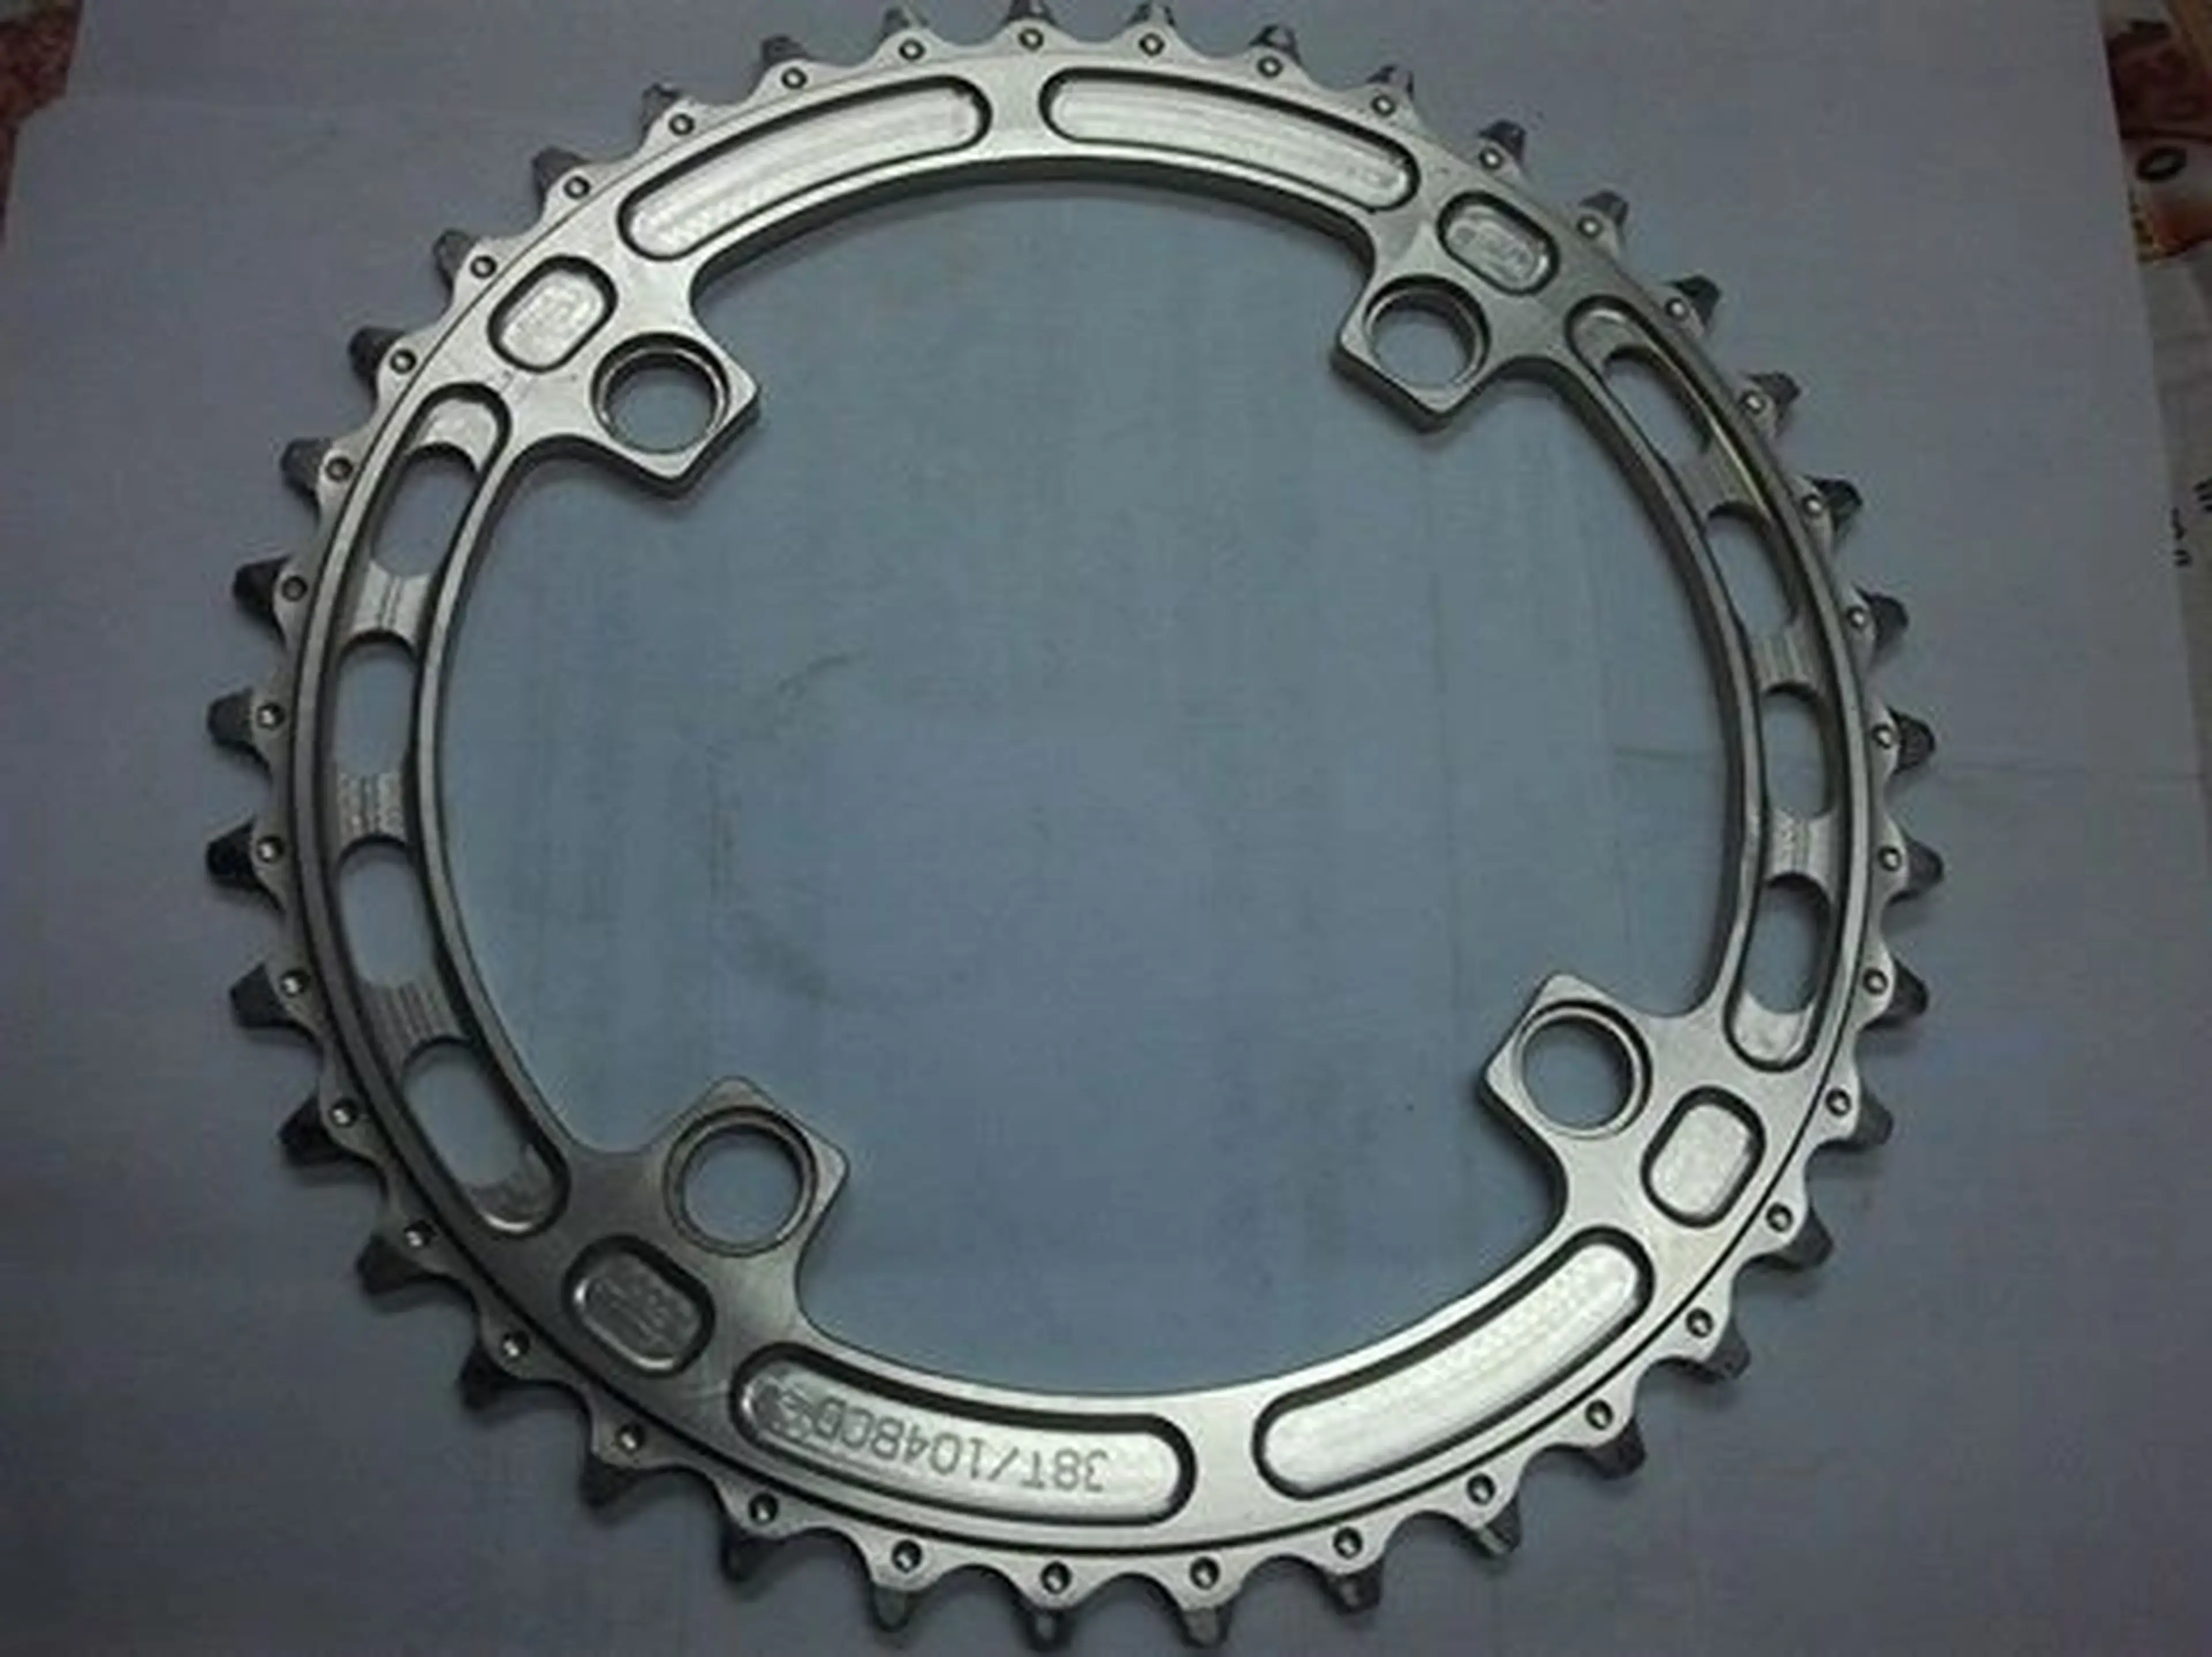 1. Hope Chainring